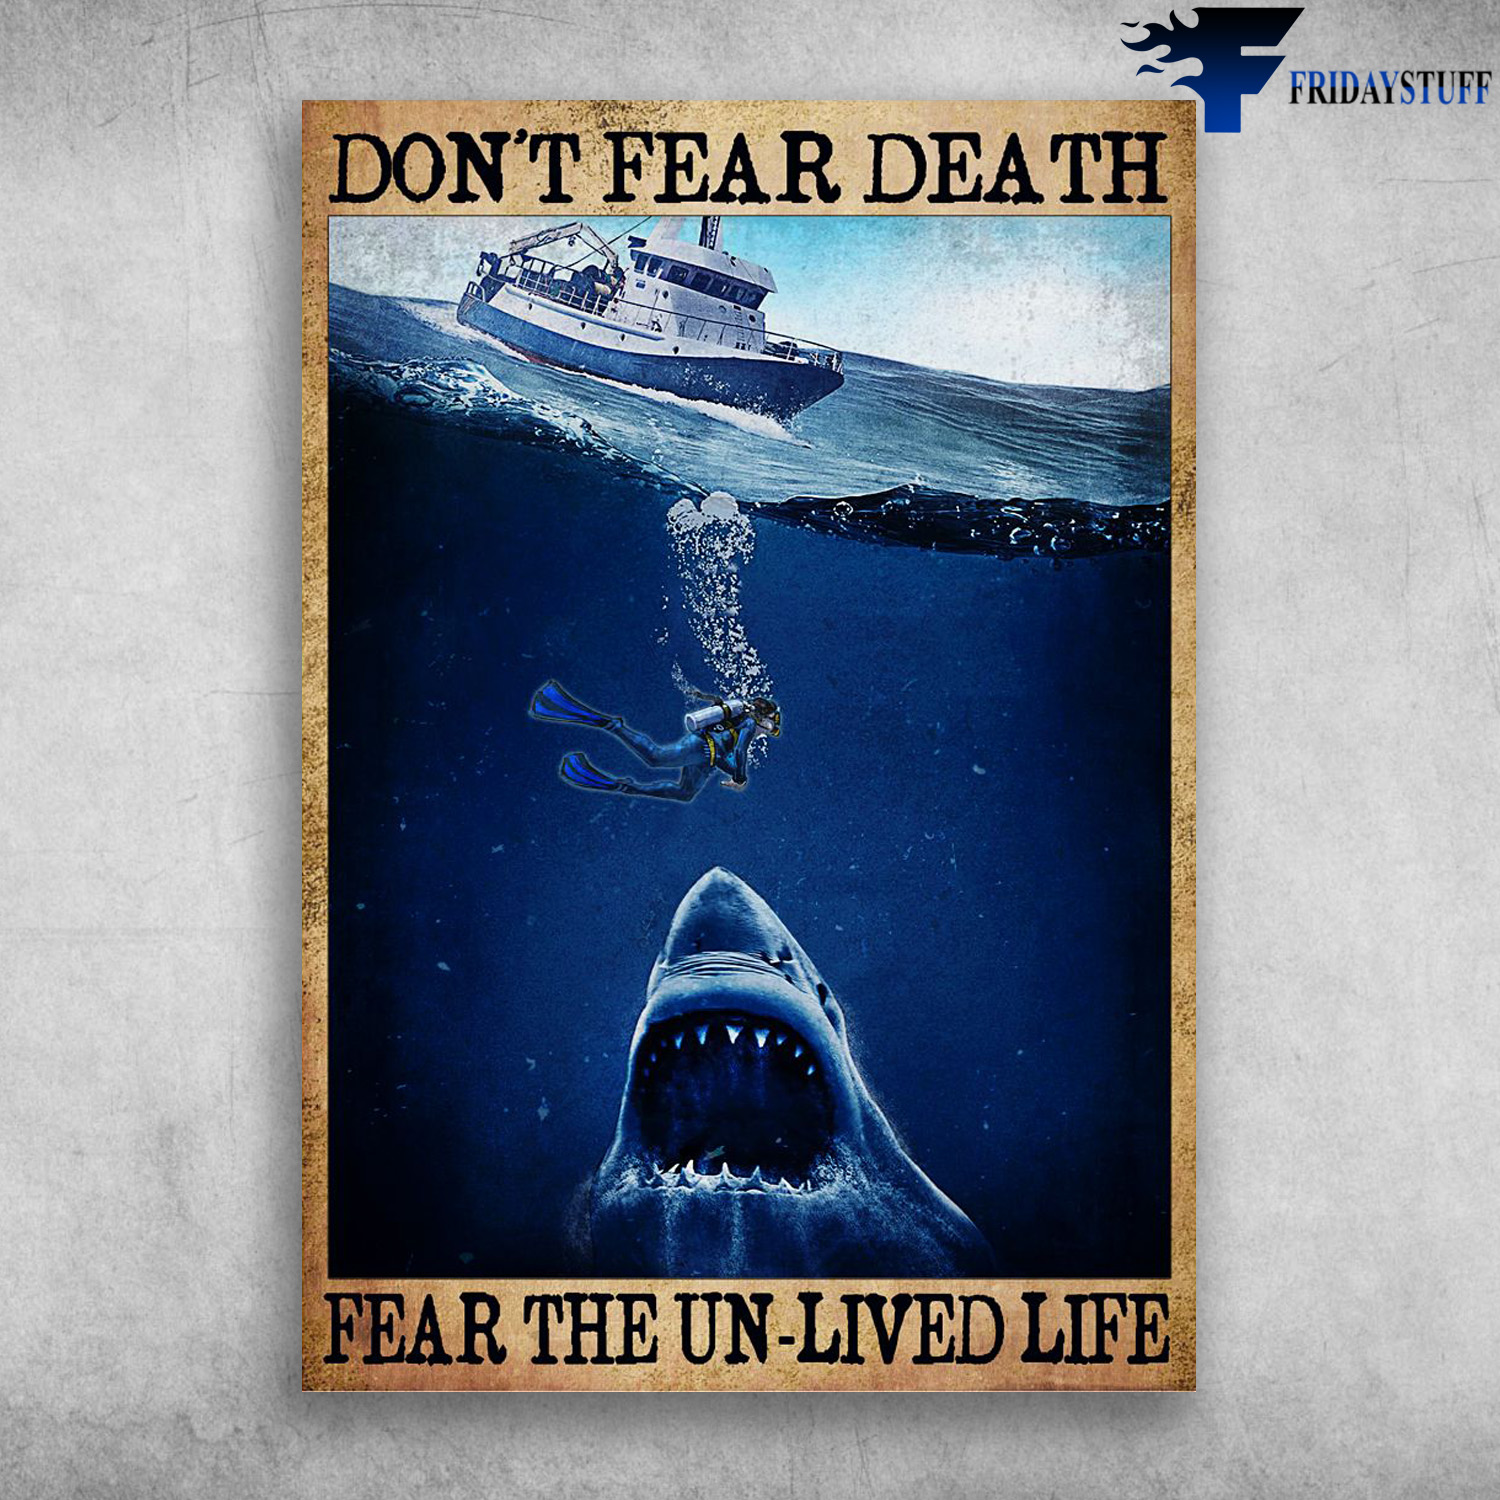 Diving In The Ocean, Shark And Diver - Don' Fear Death, Fear The Un'lived Life